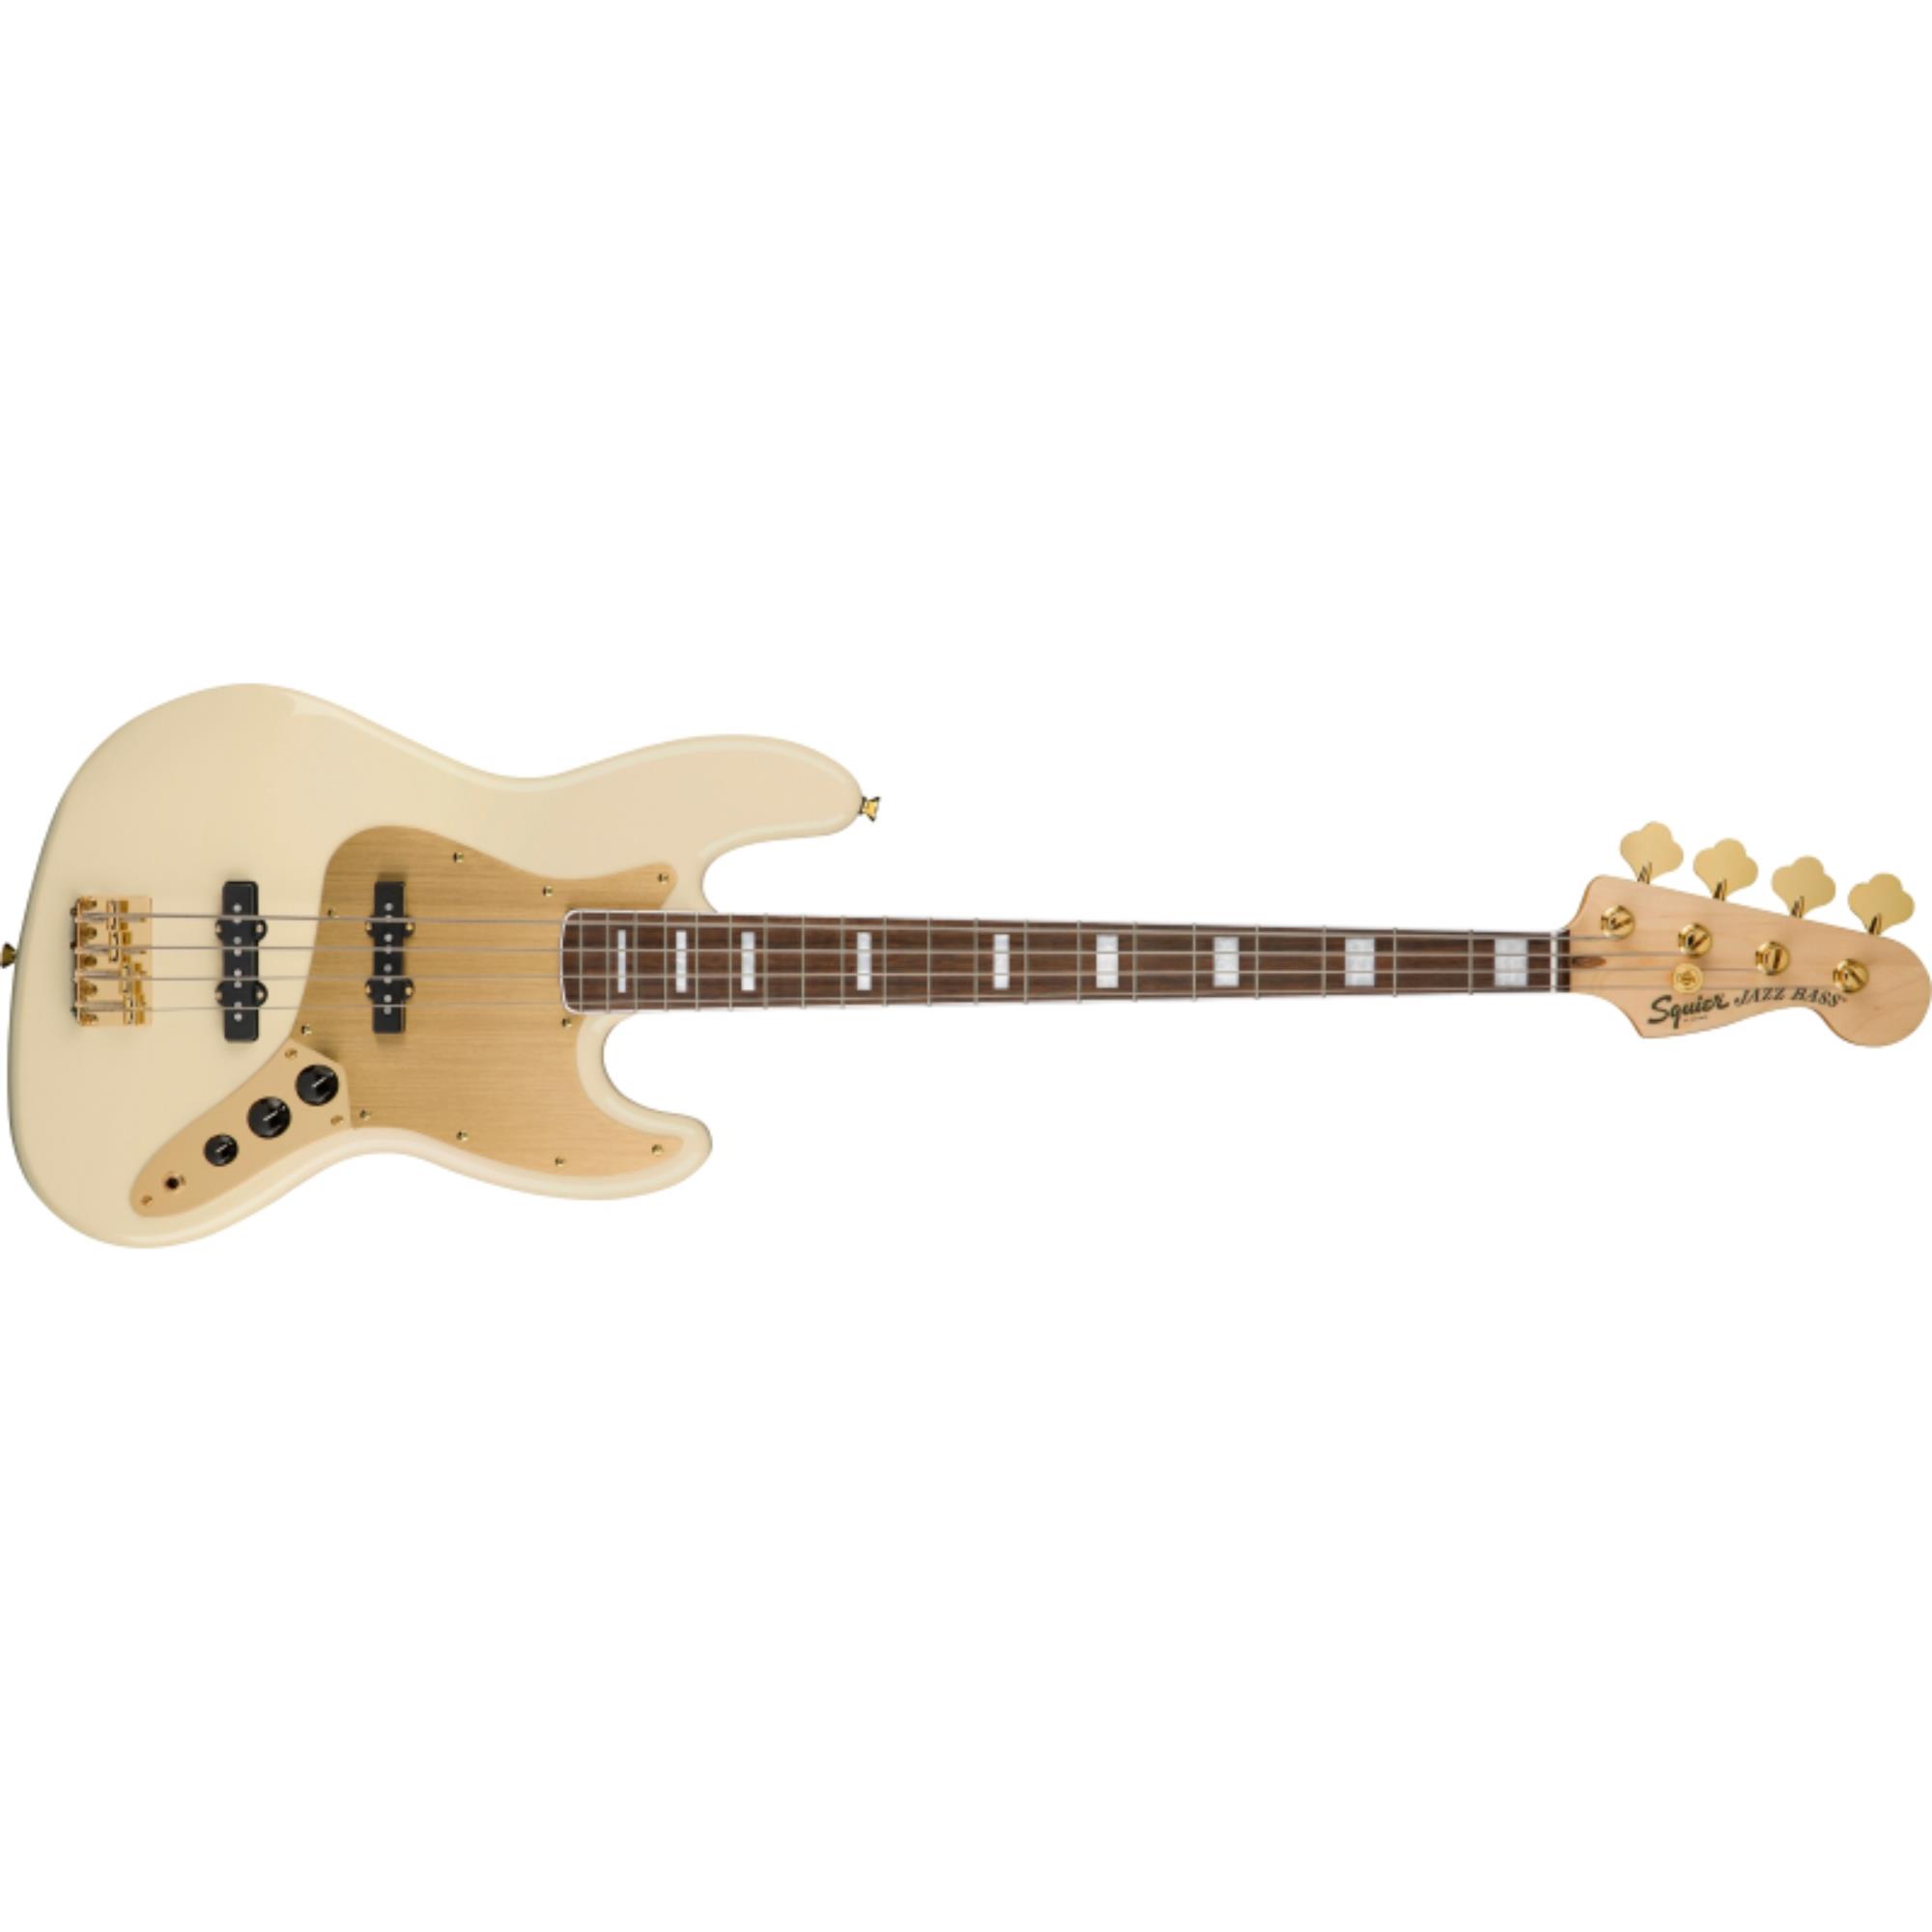 SQUIER 40th Anniversary Jazz Bass  Gold Edition  Olympic White Model  0379440505 UPC - Bassi Bassi - Elettrici 4 Corde